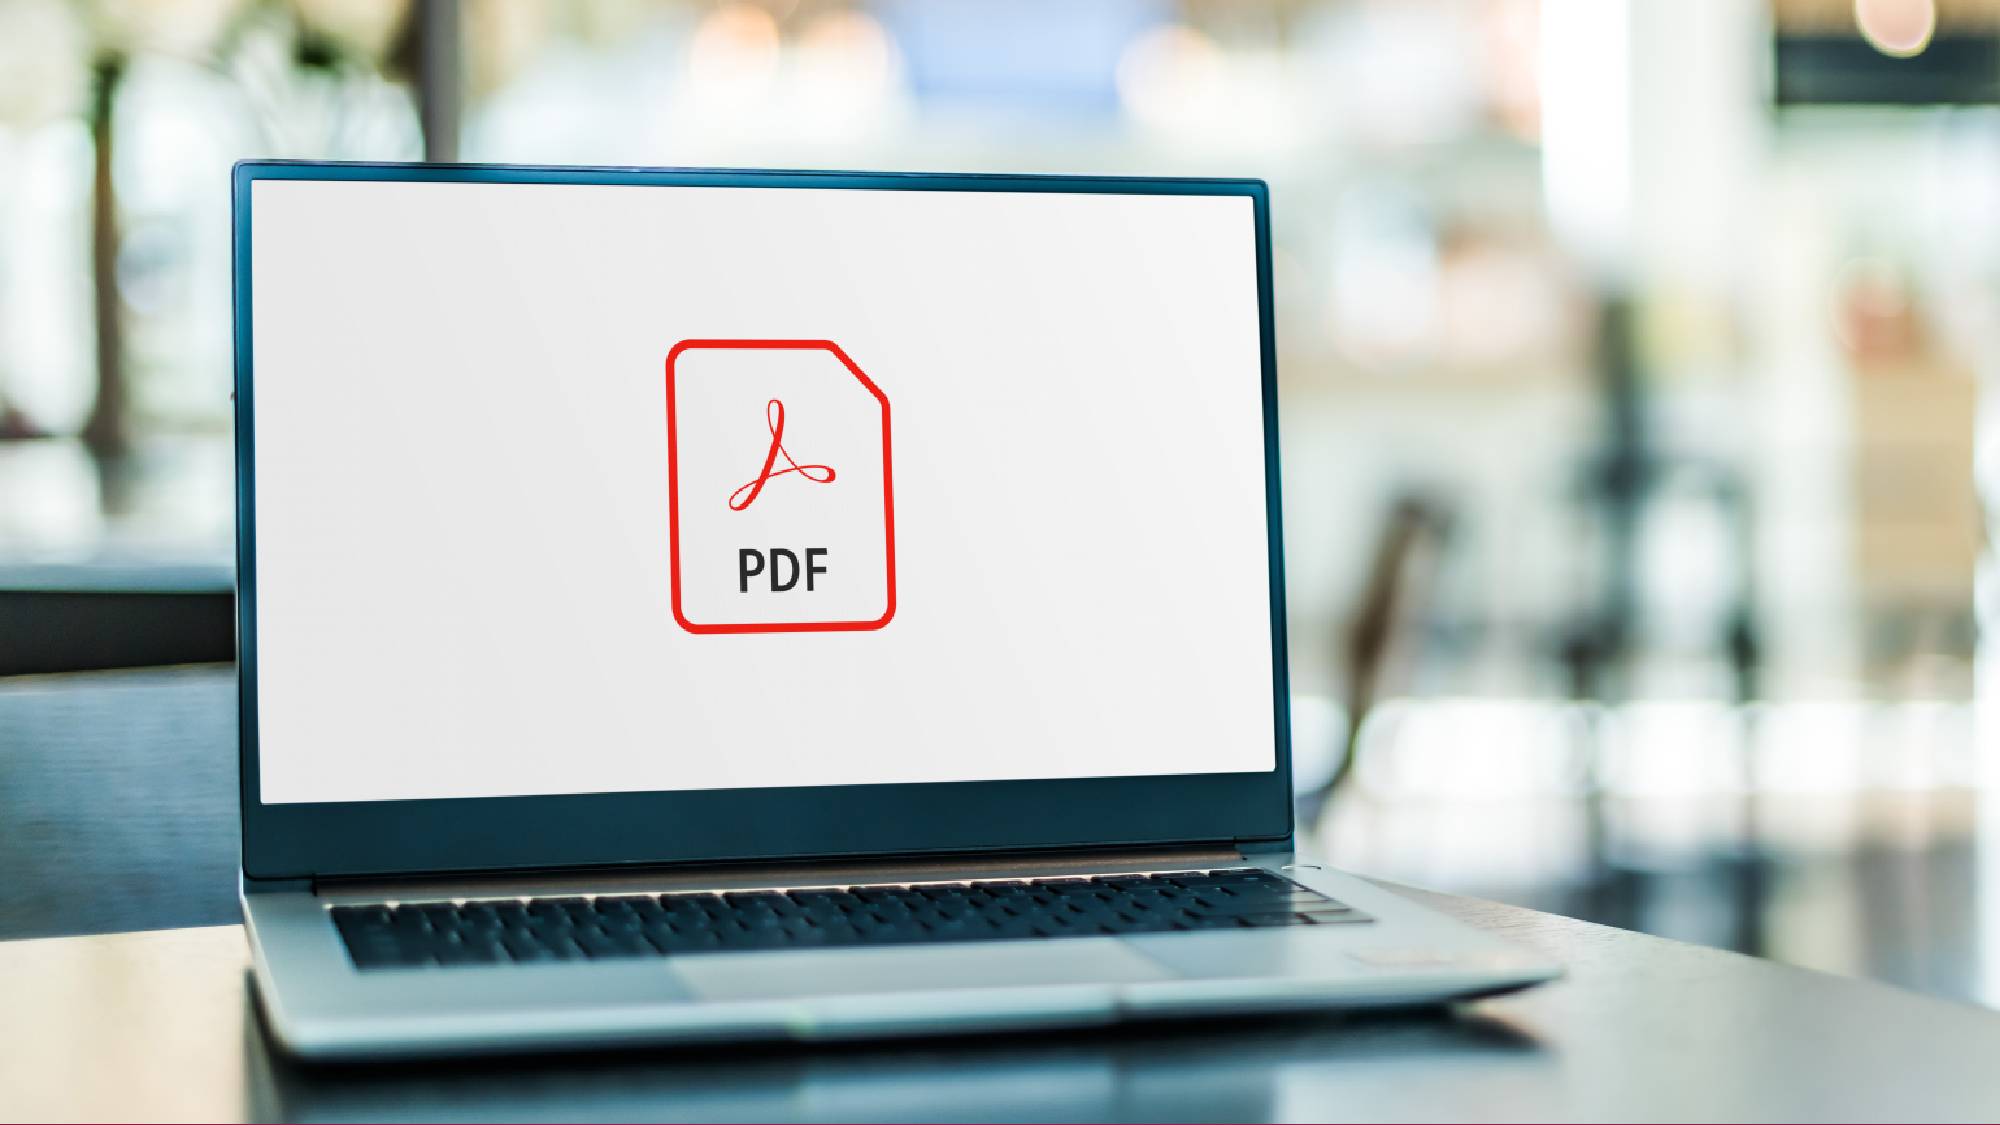 How To Save A Webpage As A PDF In Chrome